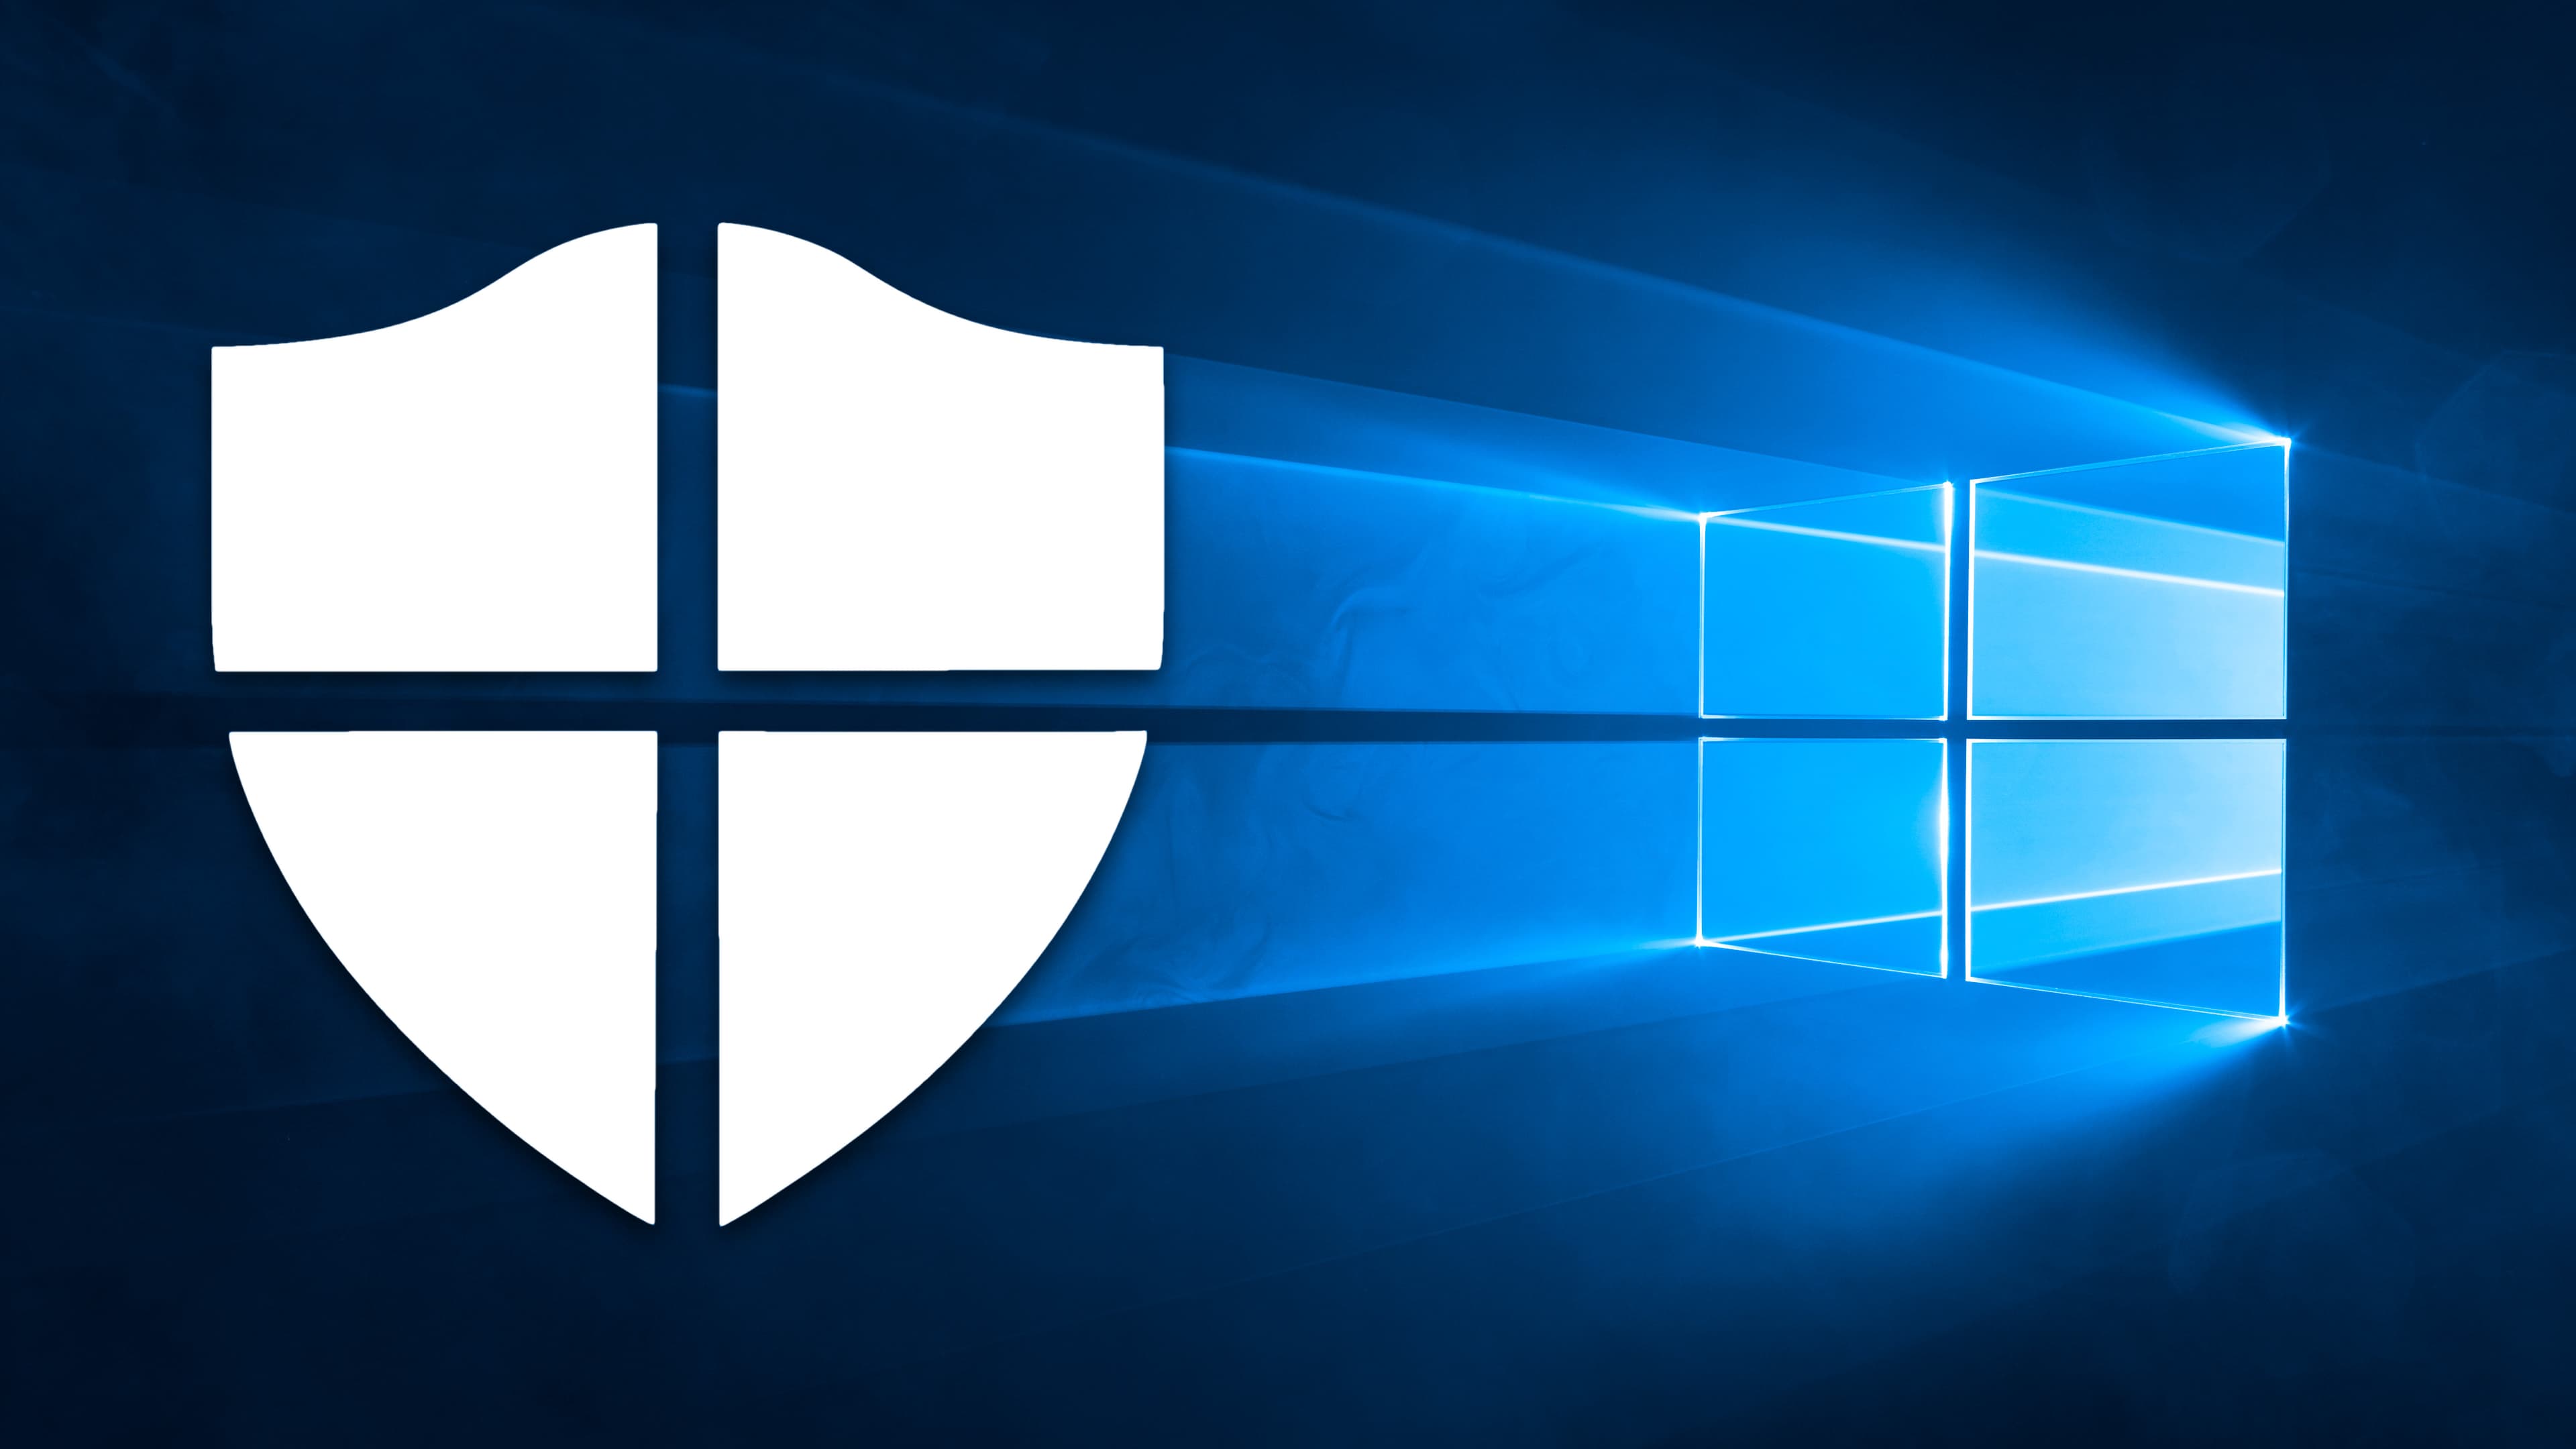 Microsoft Defender Tools 1.15 b08 download the last version for apple